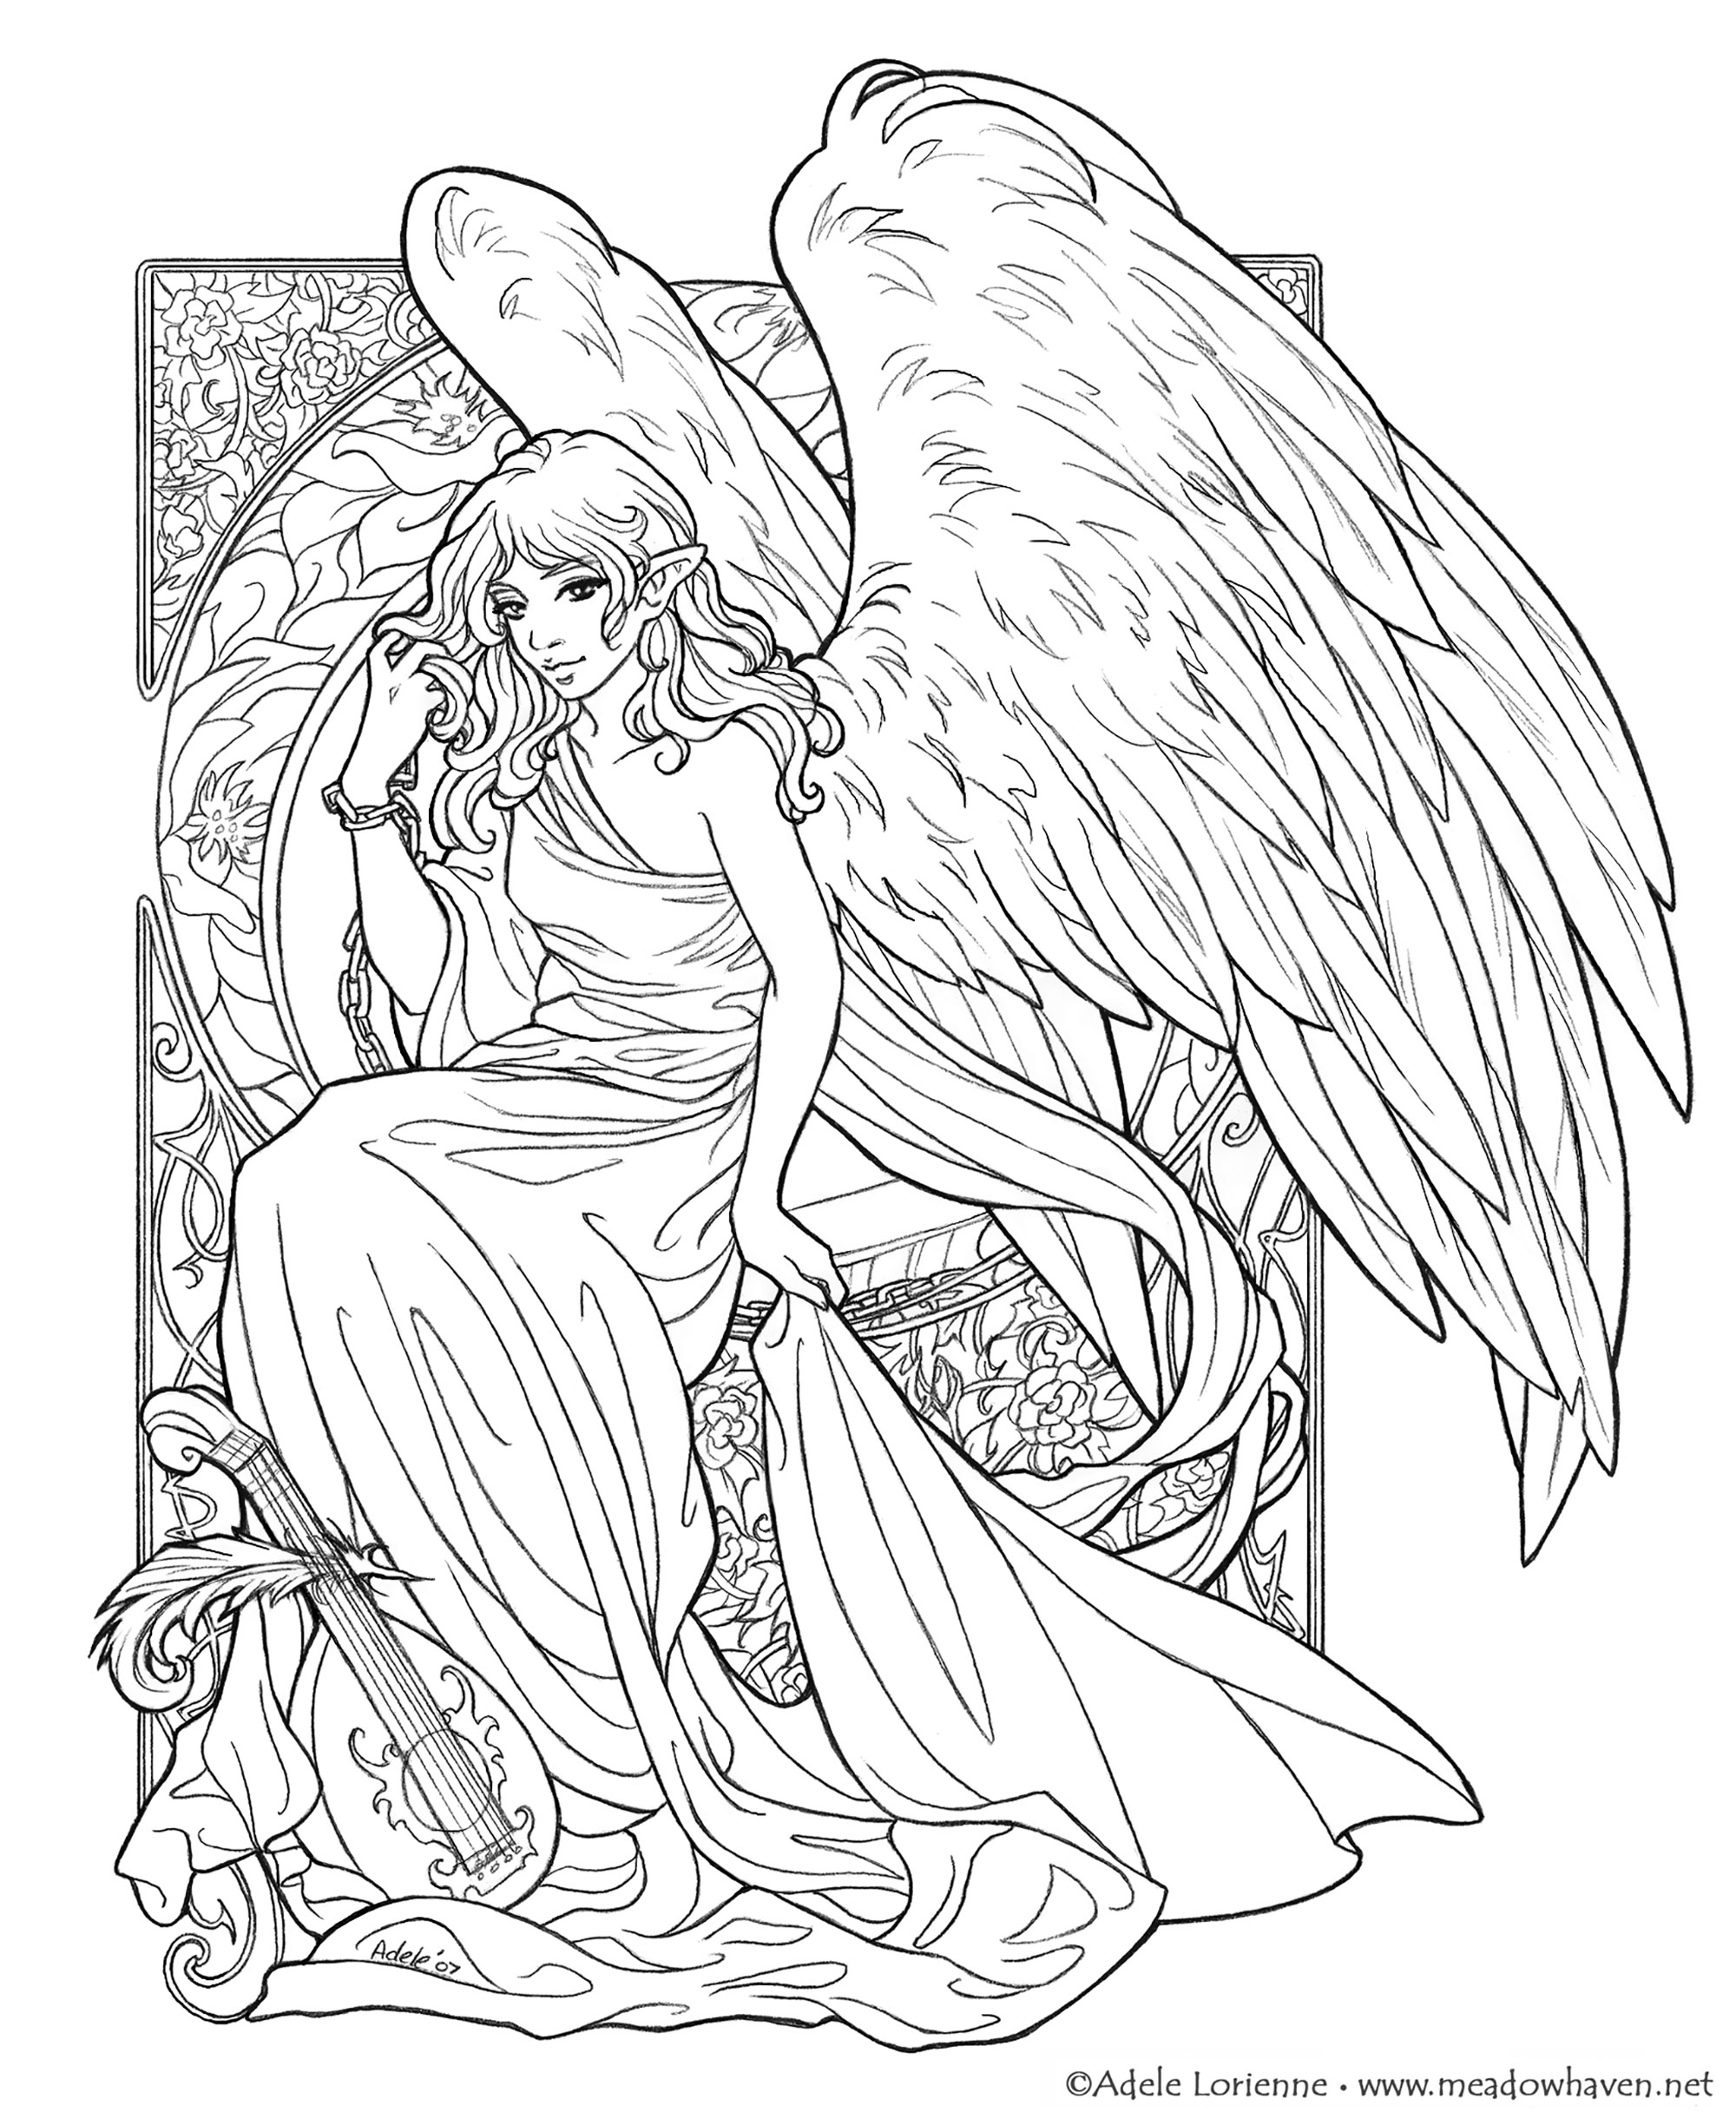 Vampiro e mulher - Valentin - Coloring Pages for Adults